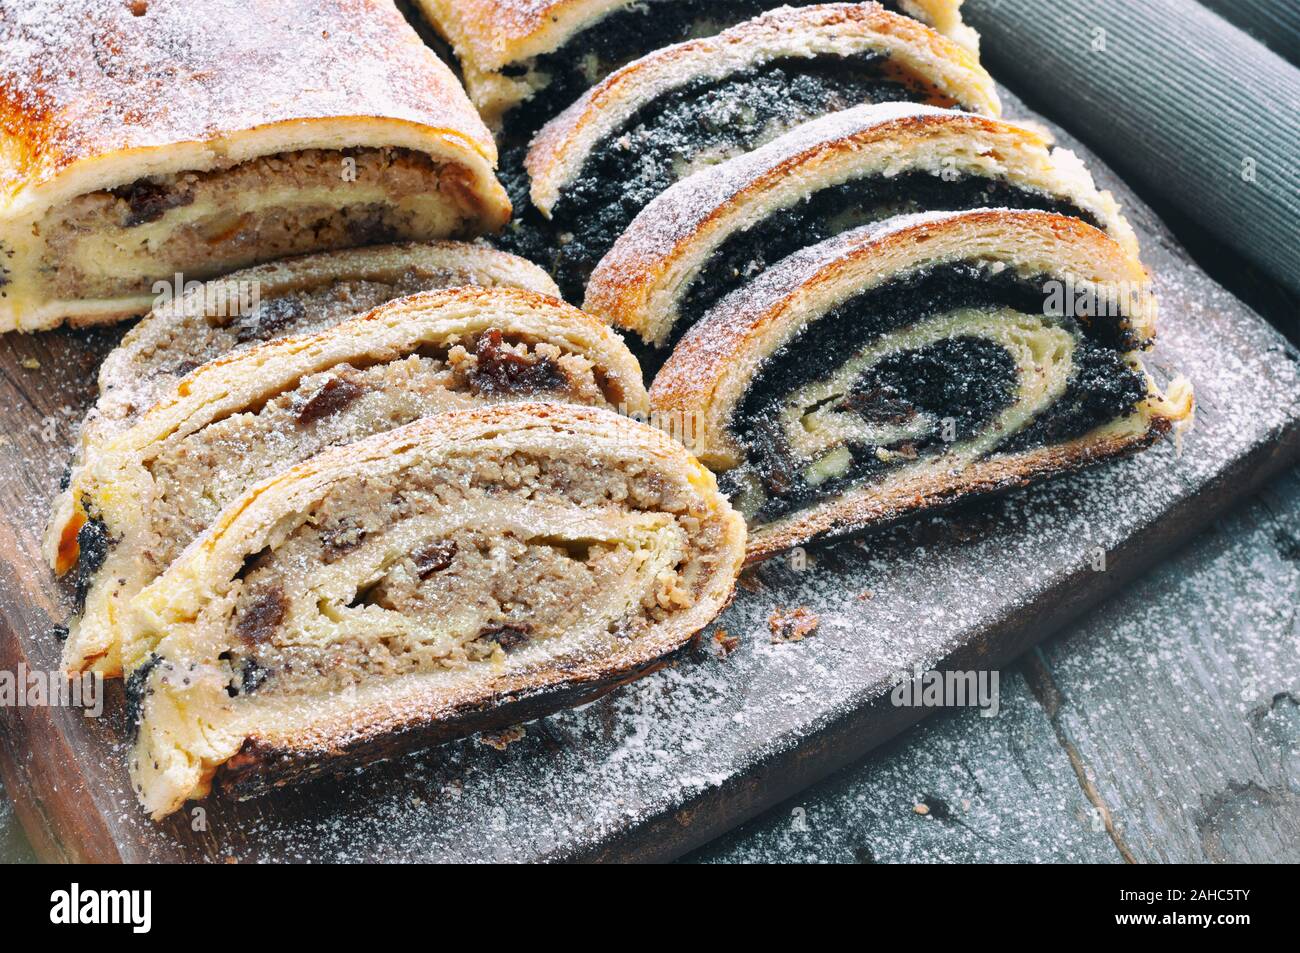 Poppy seed roll and wallnut roll on wooden table Stock Photo